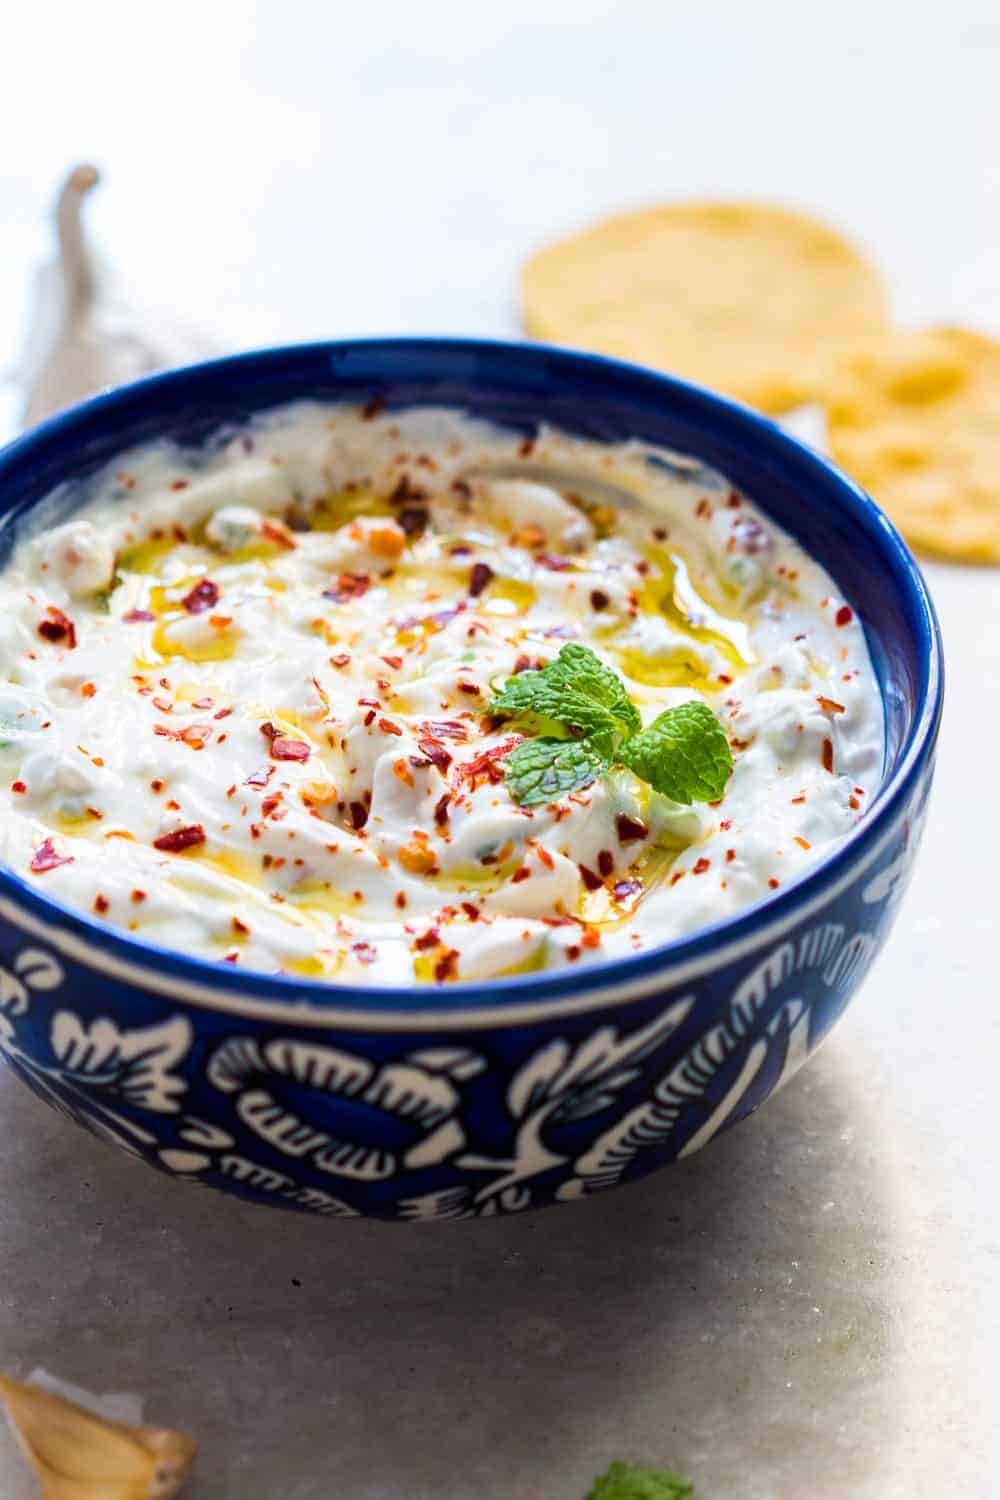 A light, refreshing and super addictive garlicky yogurt party dip to go with chips, wings, cutlets, fries and other finger food. Low calorie and healthy too.